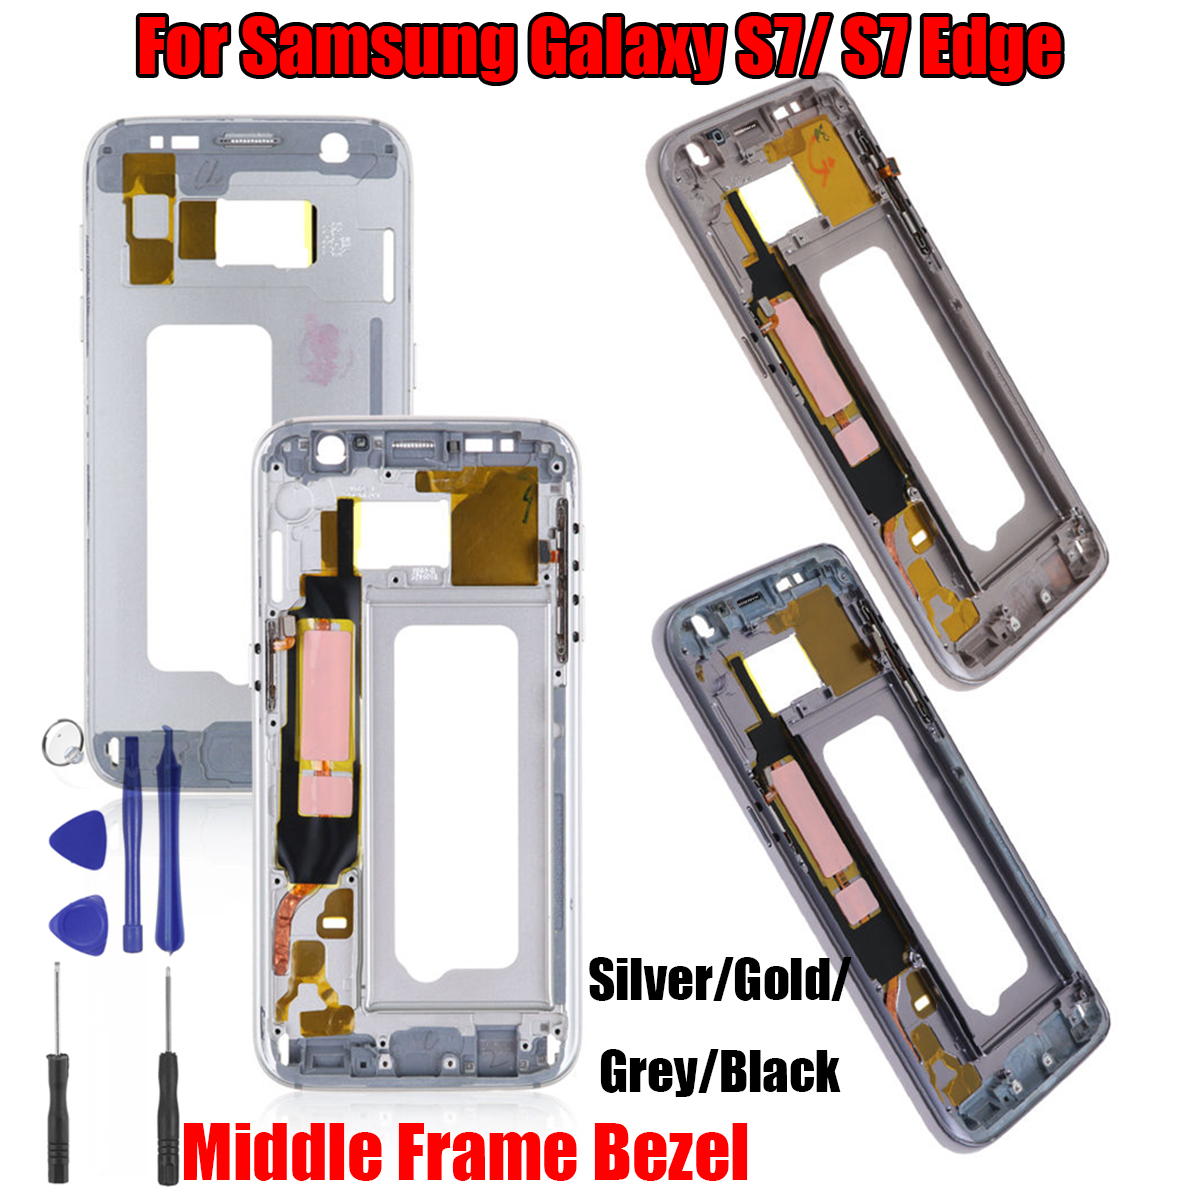 Chassis-Mid-Frame-Cover-Replacement-Assembly-for-Samsung-Galaxy-S7S7-Edge-1280295-1